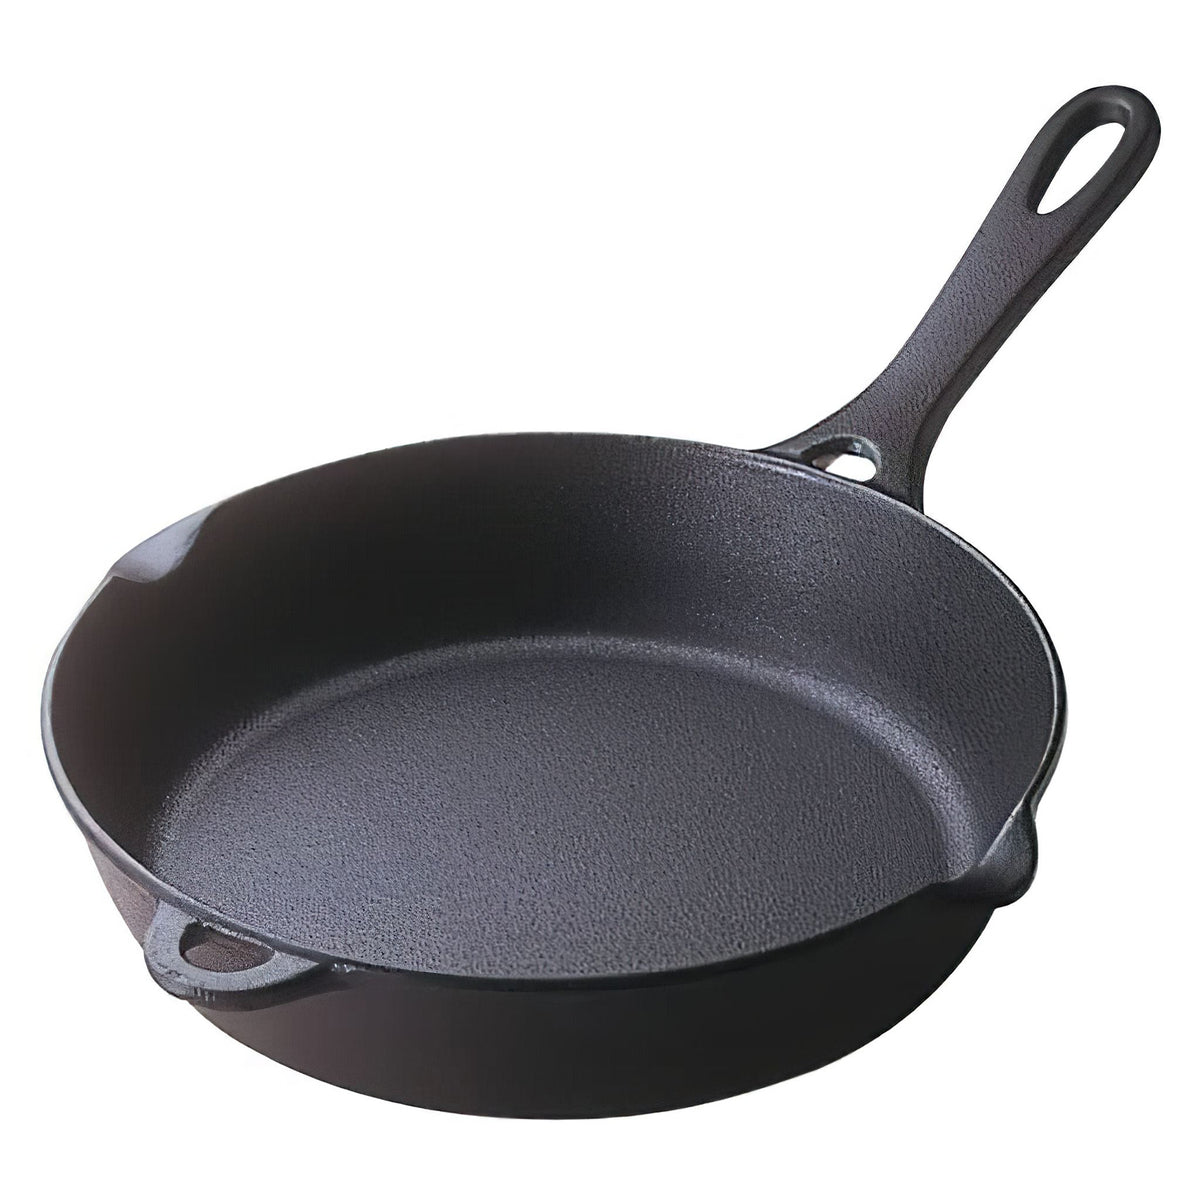 Iwachu Cast-Iron Grill Pan in 2023  Cast iron grill pan, Cast iron grill, Cast  iron